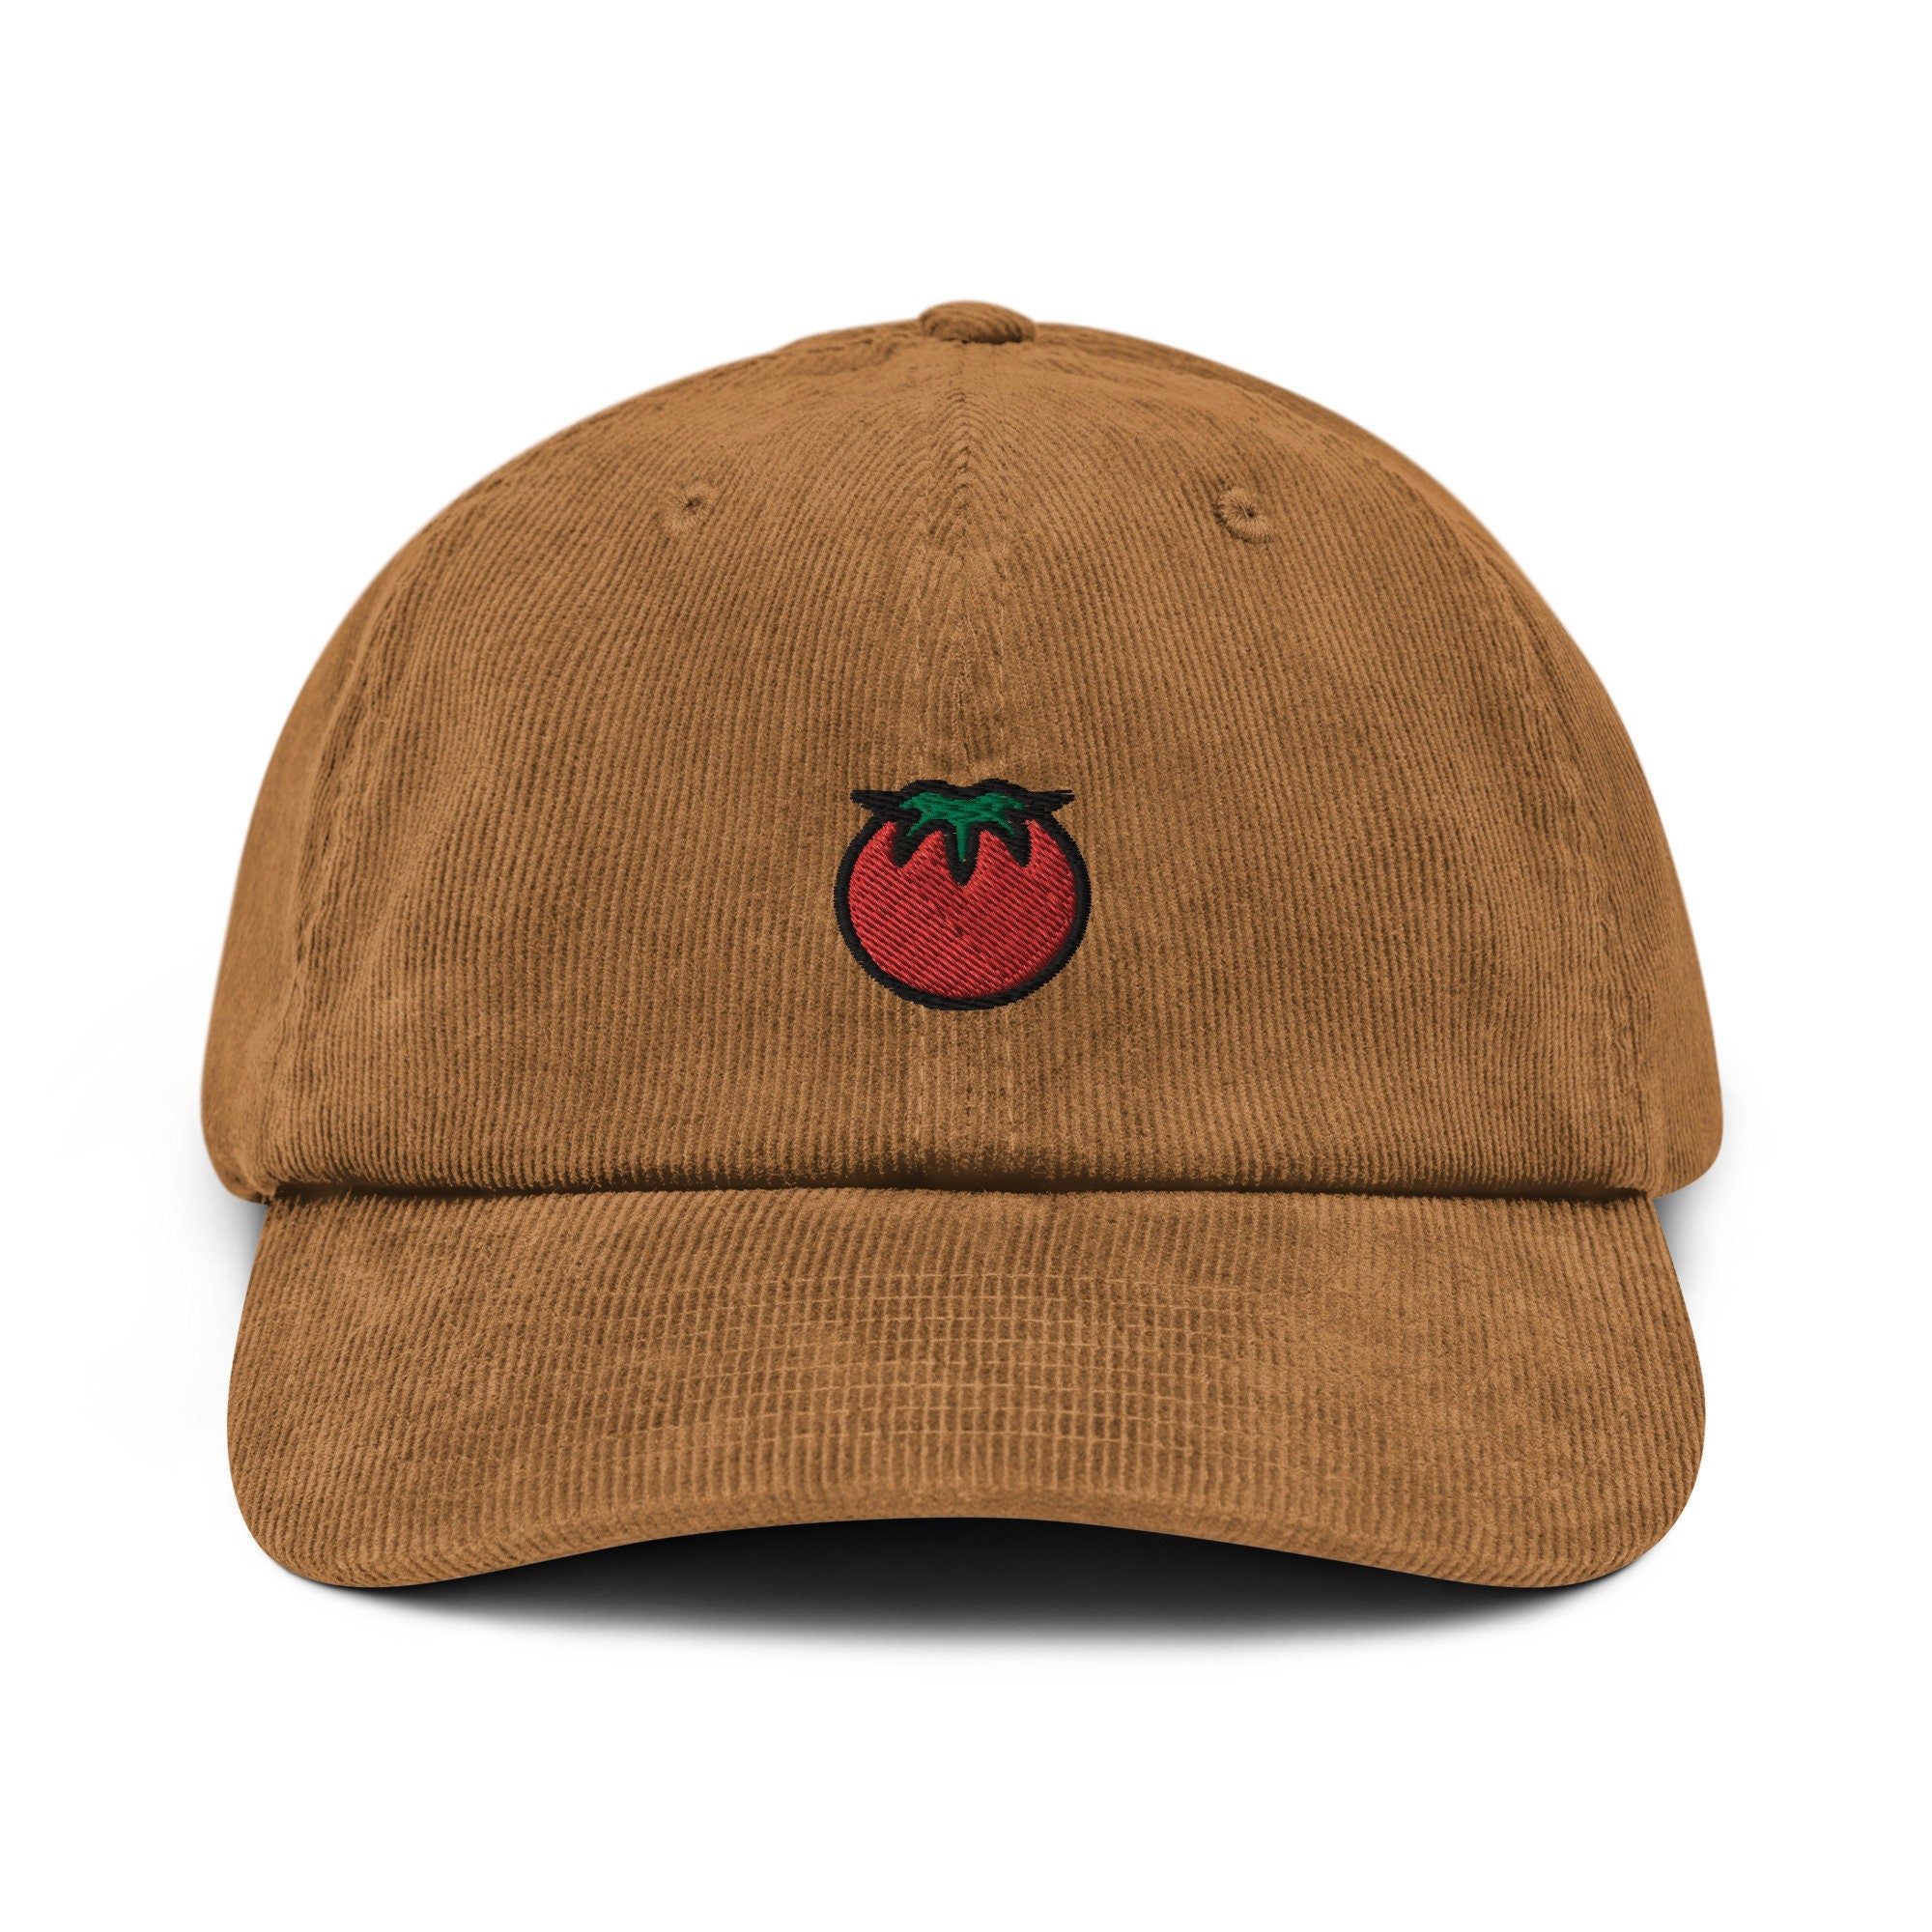 Tomato Corduroy Hat, Handmade Embroidered Corduroy Dad Cap - Multiple Colors